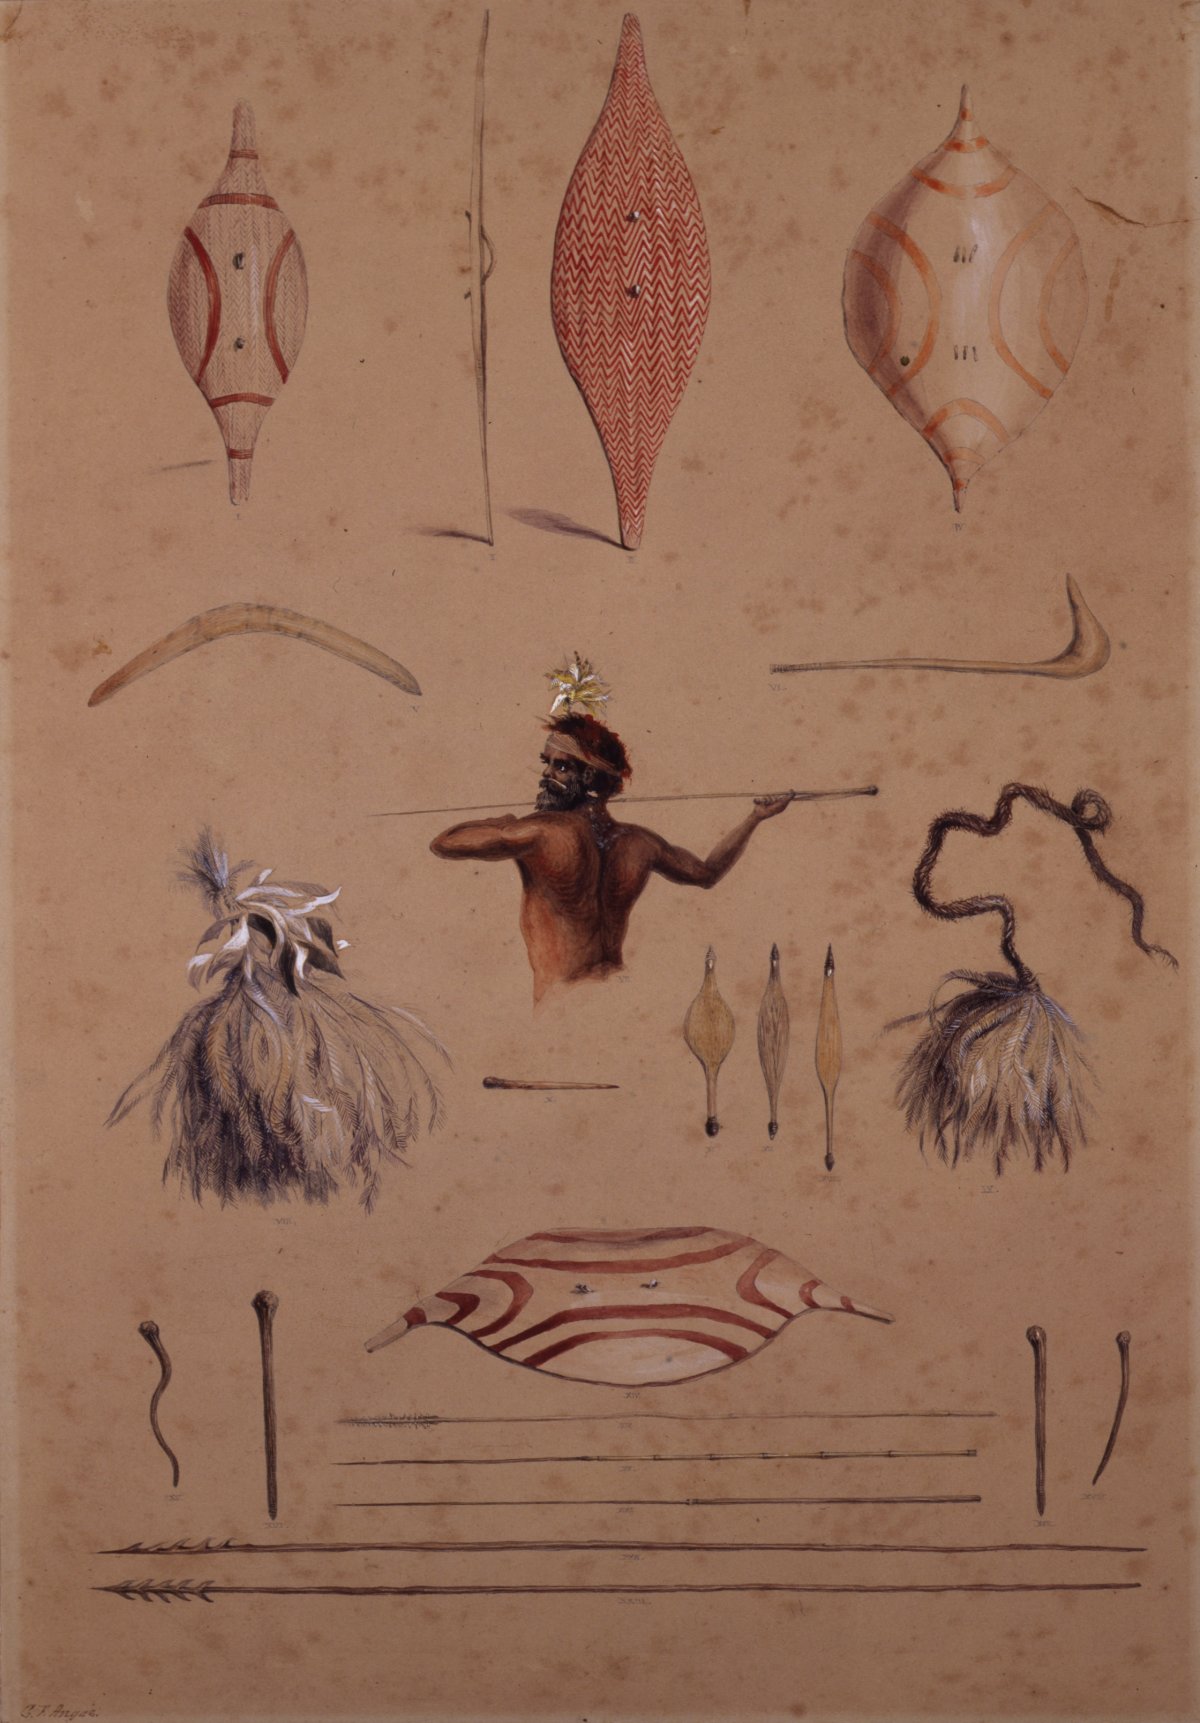 Watercolour representation of weapons and implements